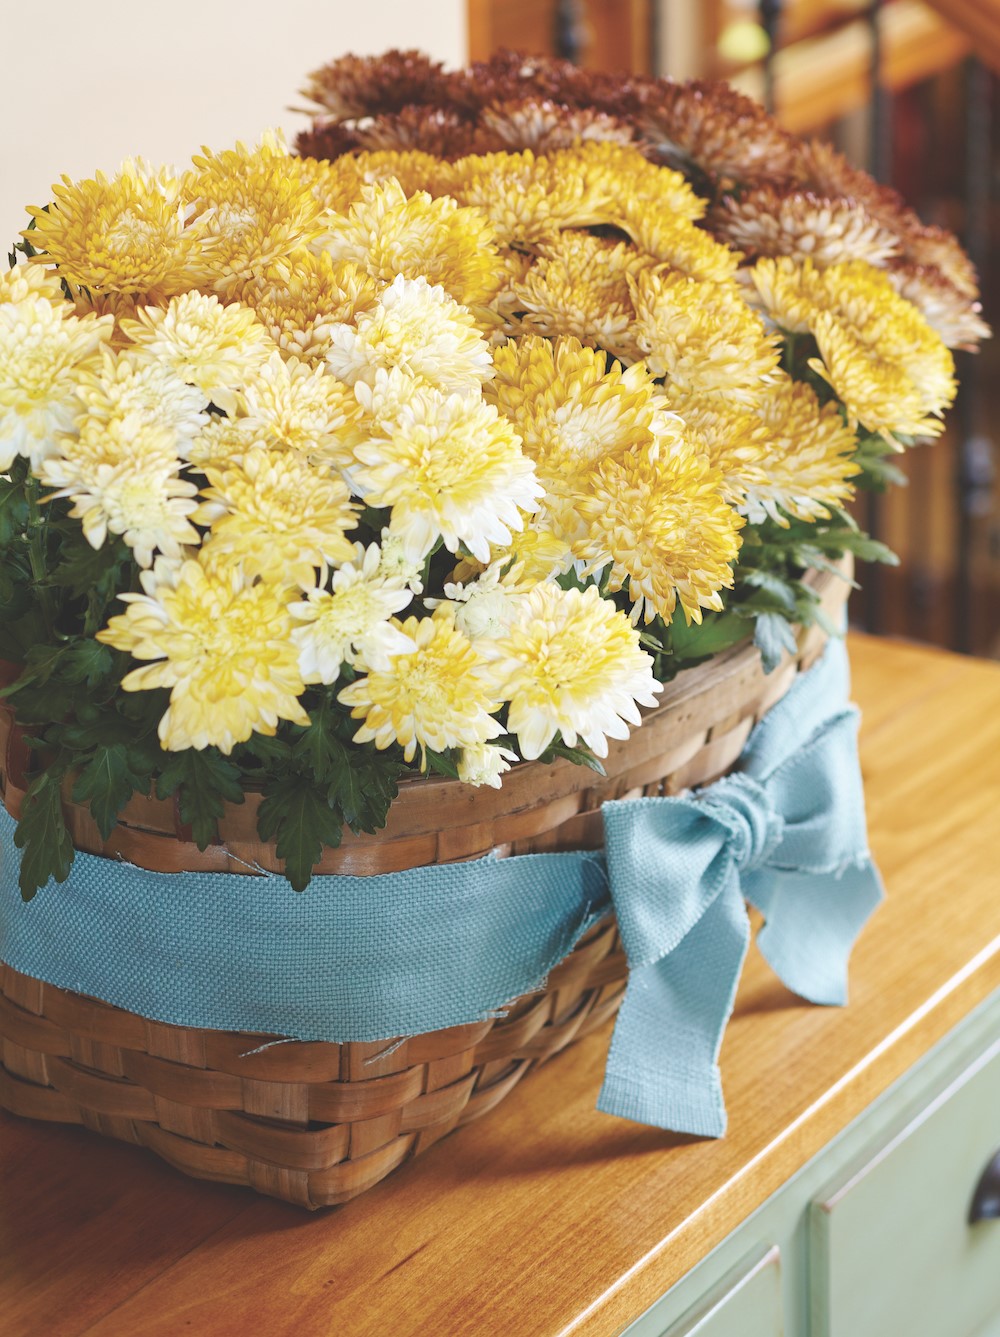 Yellow and burgundy mums in a woven basket with blue bow